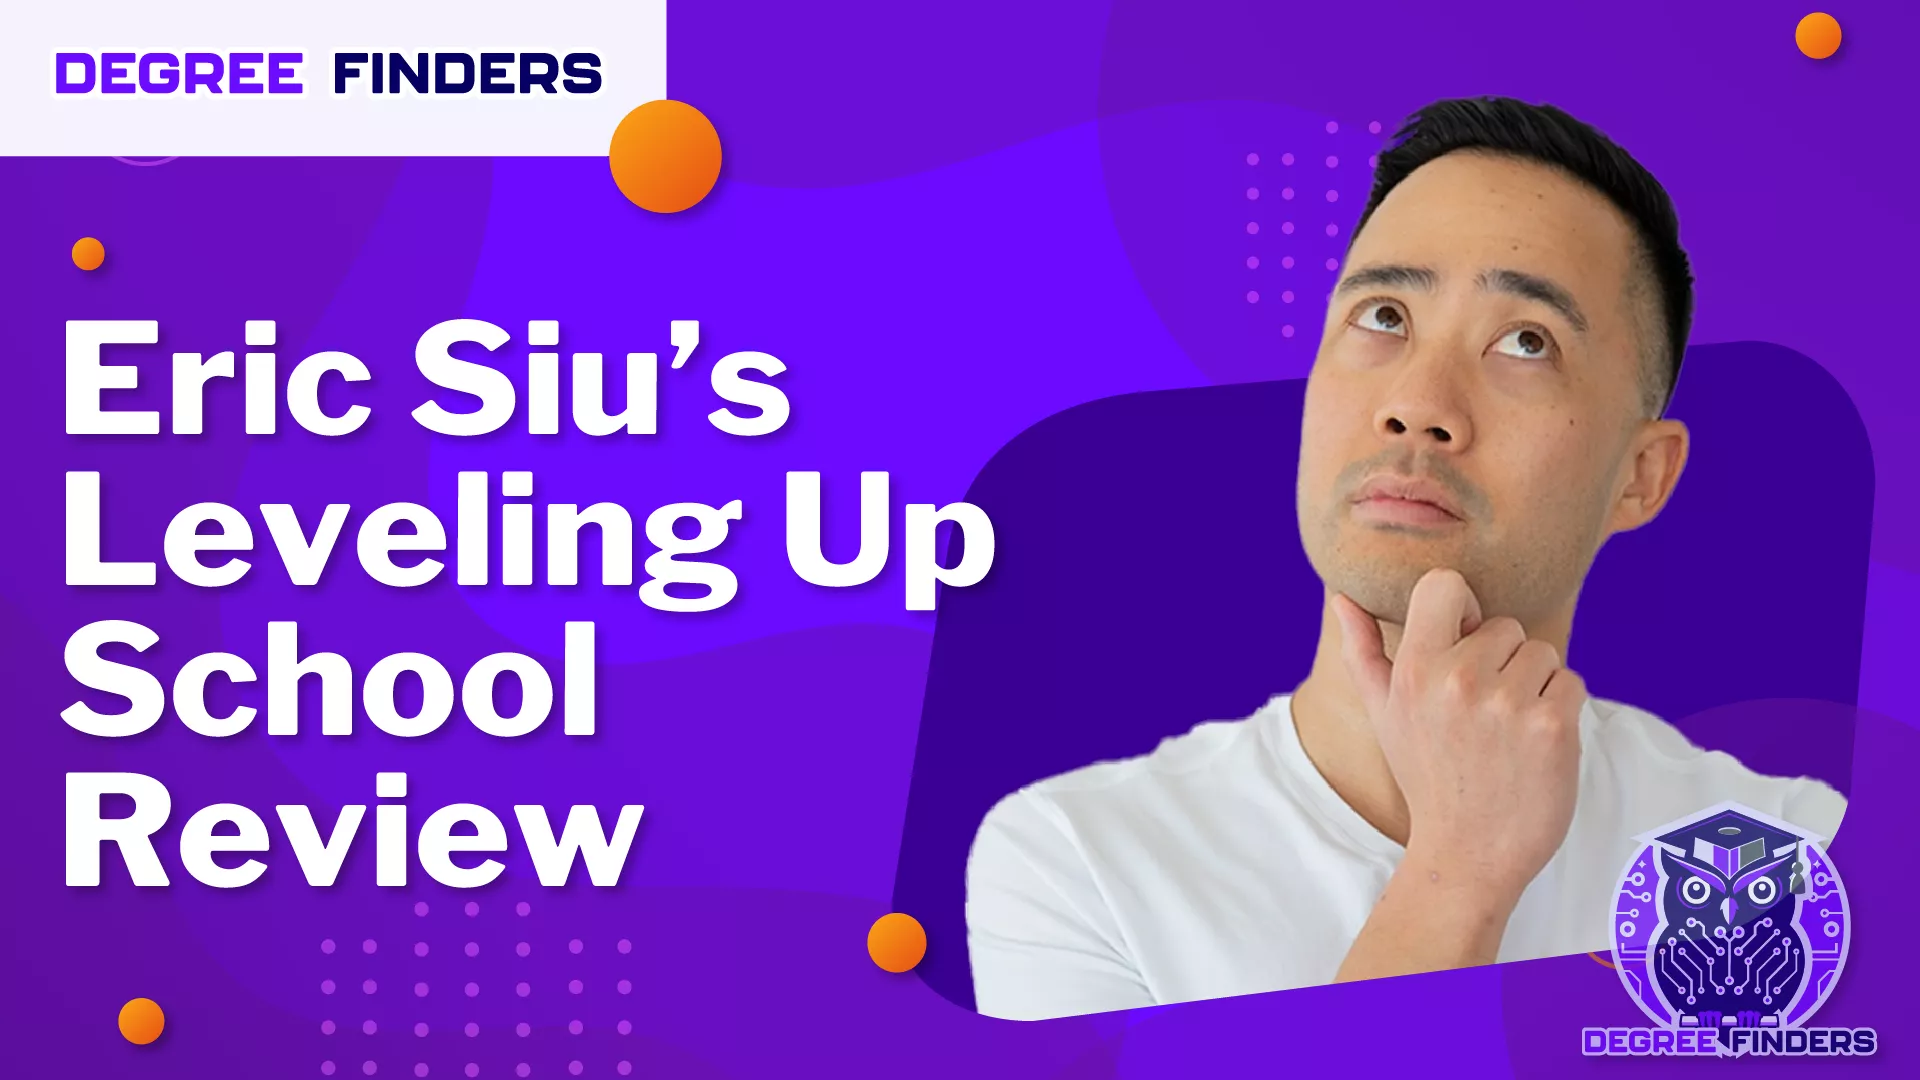 Eric Siu’s Leveling Up School Review